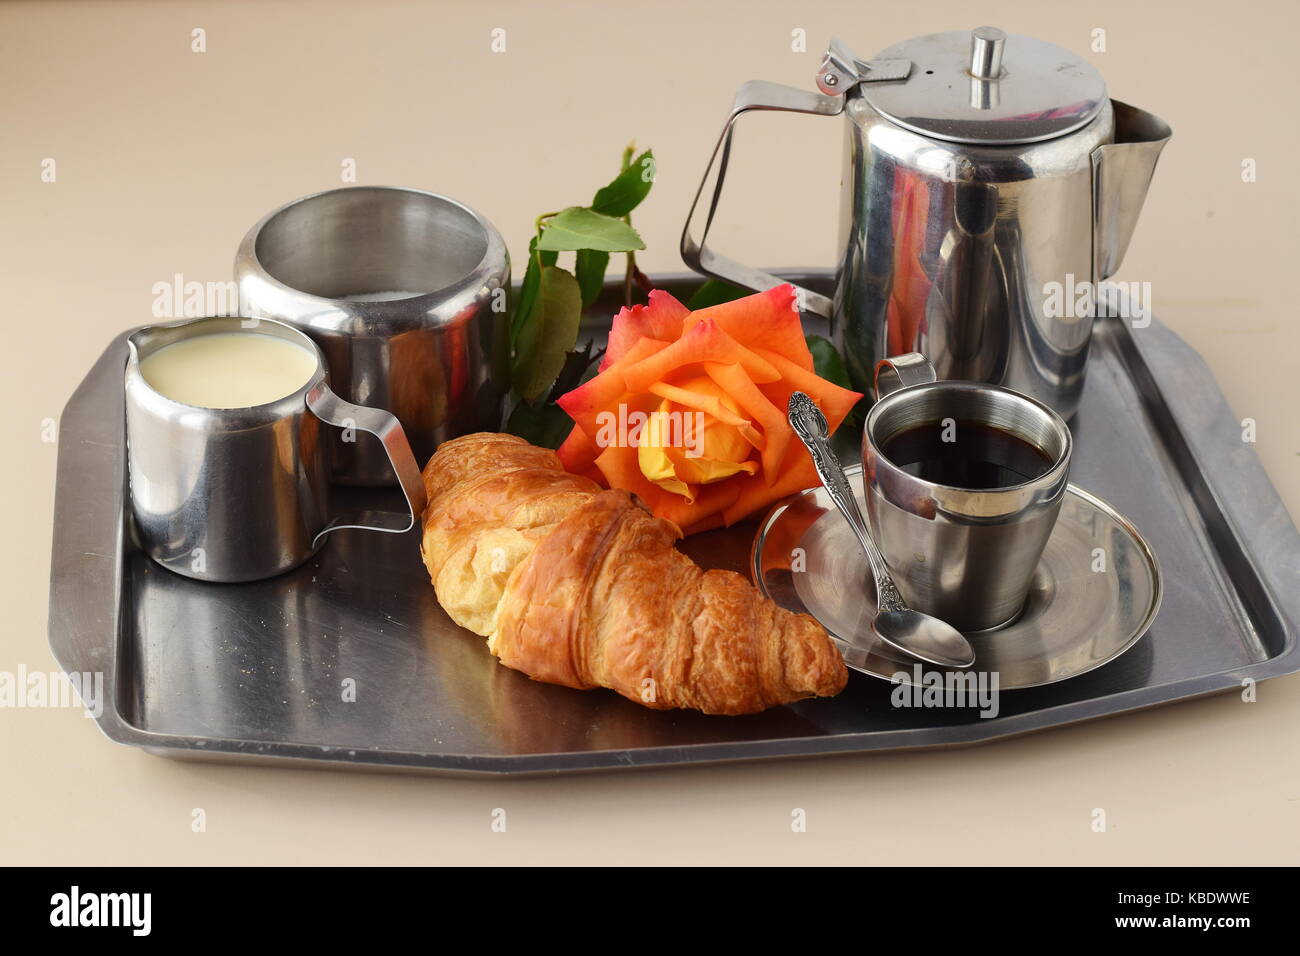 Romantic breakfast in bed. Coffee set, rose, crisp with egg on a silver tray. Healthy concept. Love. Romance Stock Photo